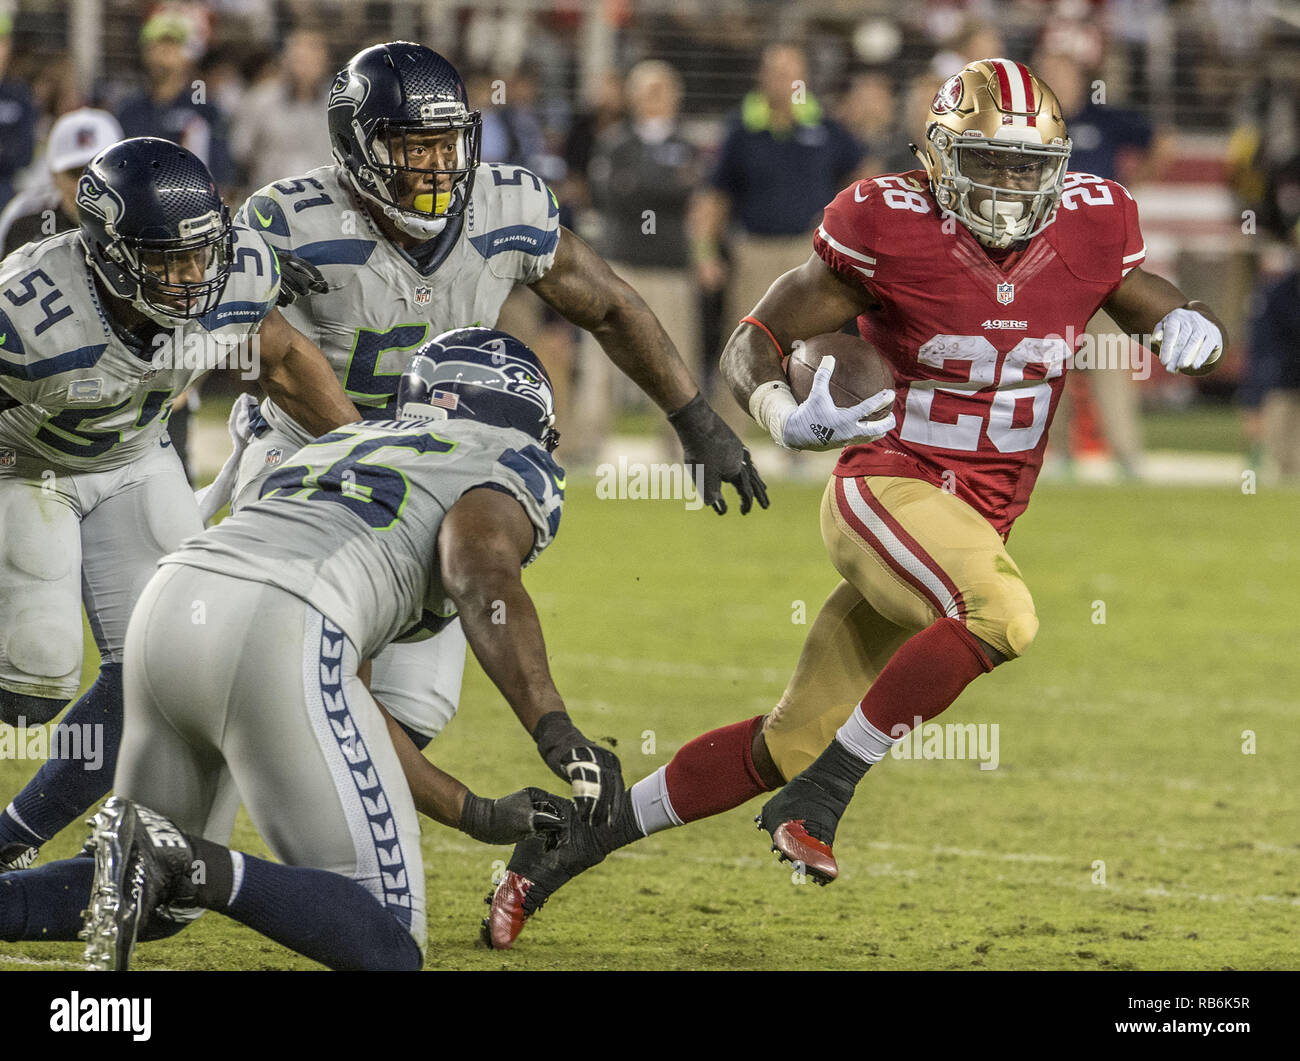 Santa Clara, California, USA. 22nd Oct, 2015. San Francisco 49ers running back Carlos Hyde (28) pulls away from Seattle Seahawks outside linebacker Bruce Irvin (51), middle linebacker Bobby Wagner (54) and defensive end Cliff Avril (56) on Thursday, October 22, 2015, at Levis Stadium in Santa Clara, California. The Seahawks defeated the 49ers 20-3 Credit: Al Golub/ZUMA Wire/Alamy Live News Stock Photo